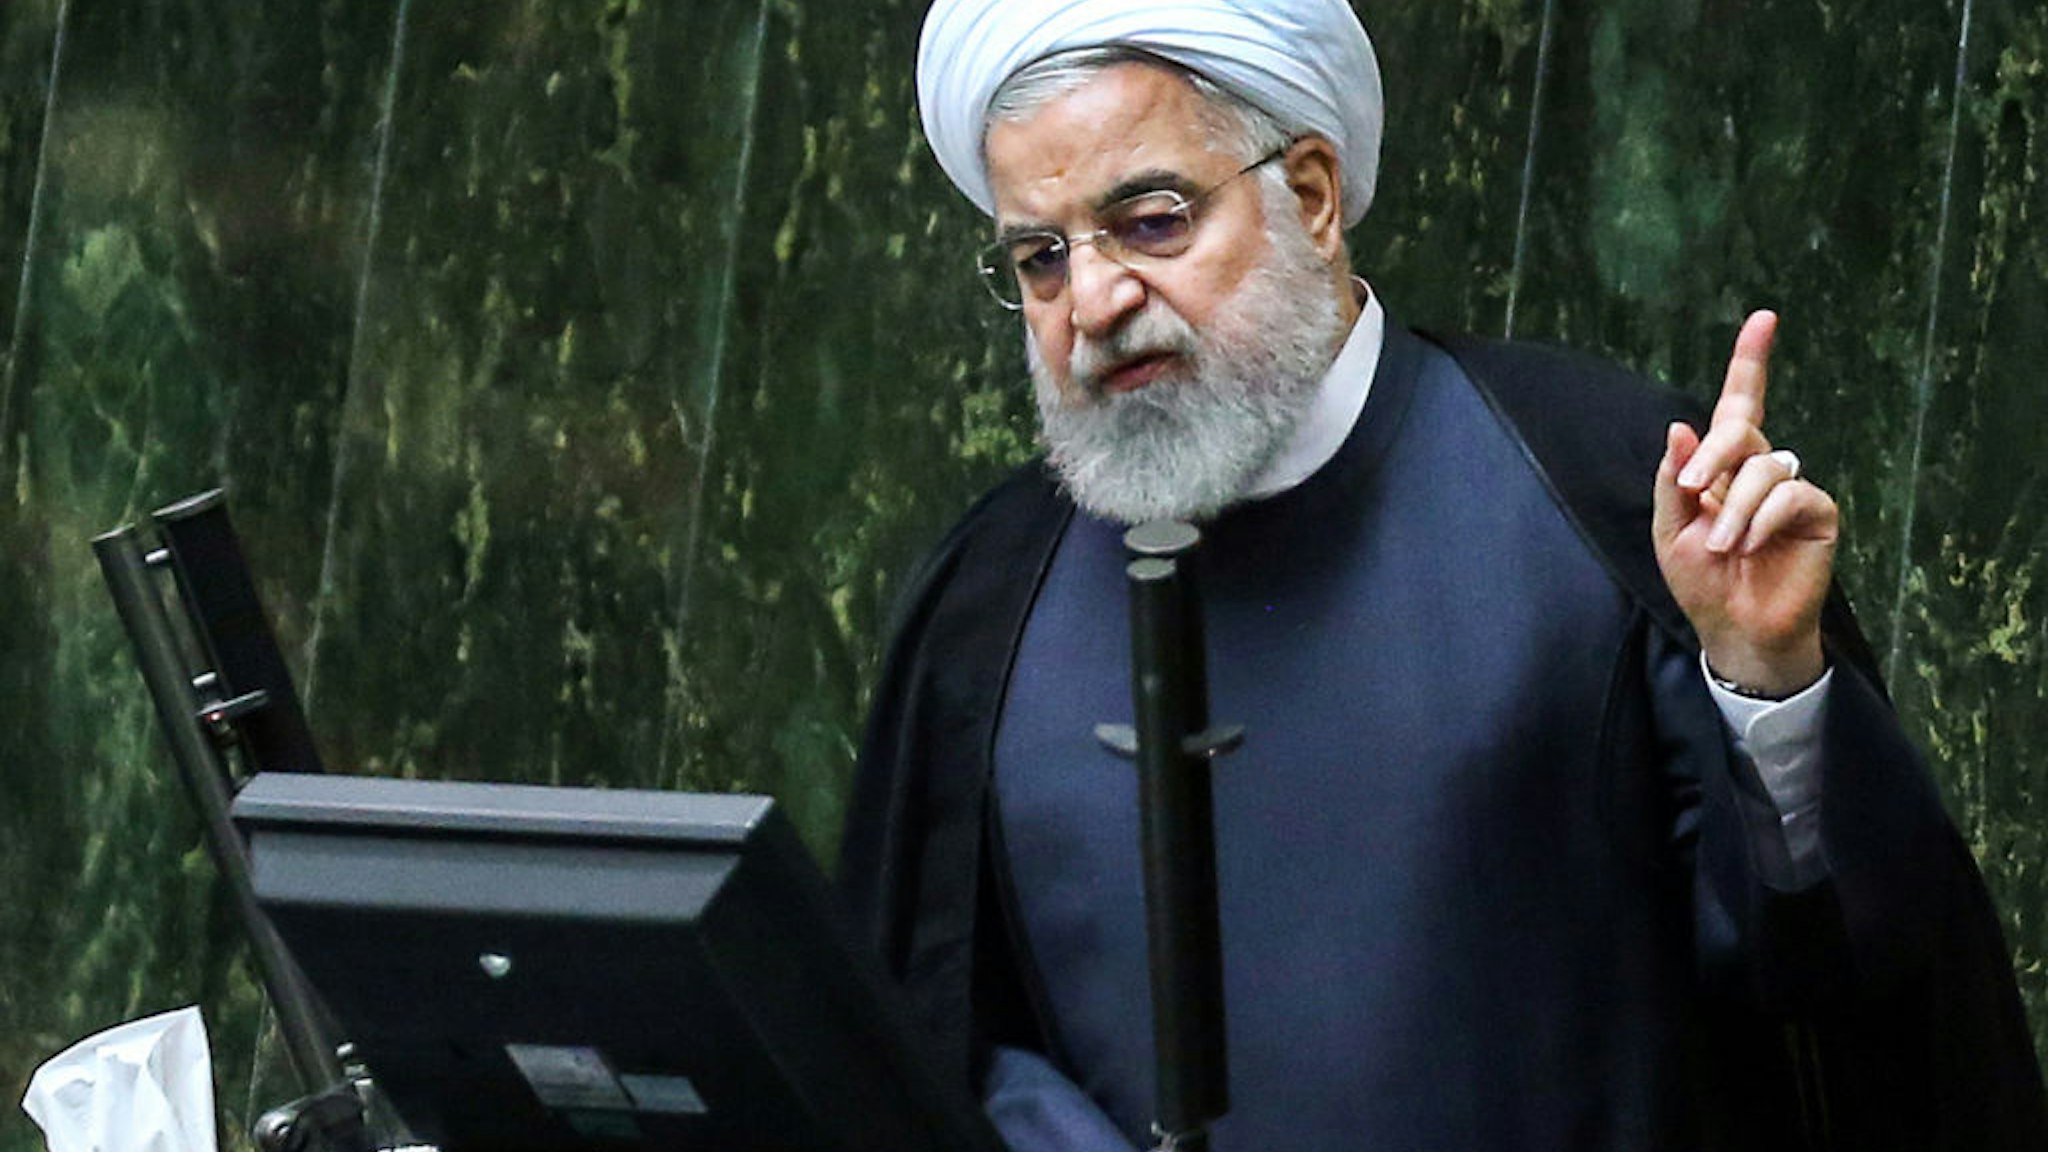 Iran's President Hassan Rouhani speaks at parliament in the capital Tehran on September 3, 2019. - In an address to parliament, Rouhani ruled out holding any bilateral talks with the United States, saying the Islamic republic is opposed to such negotiations in principle. He also said Iran was ready to further reduce its commitments to a landmark 2015 nuclear deal "in the coming days" if current negotiations yield no results by September 5. (Photo by ATTA KENARE / AFP) (Photo by ATTA KENARE/AFP via Getty Images)